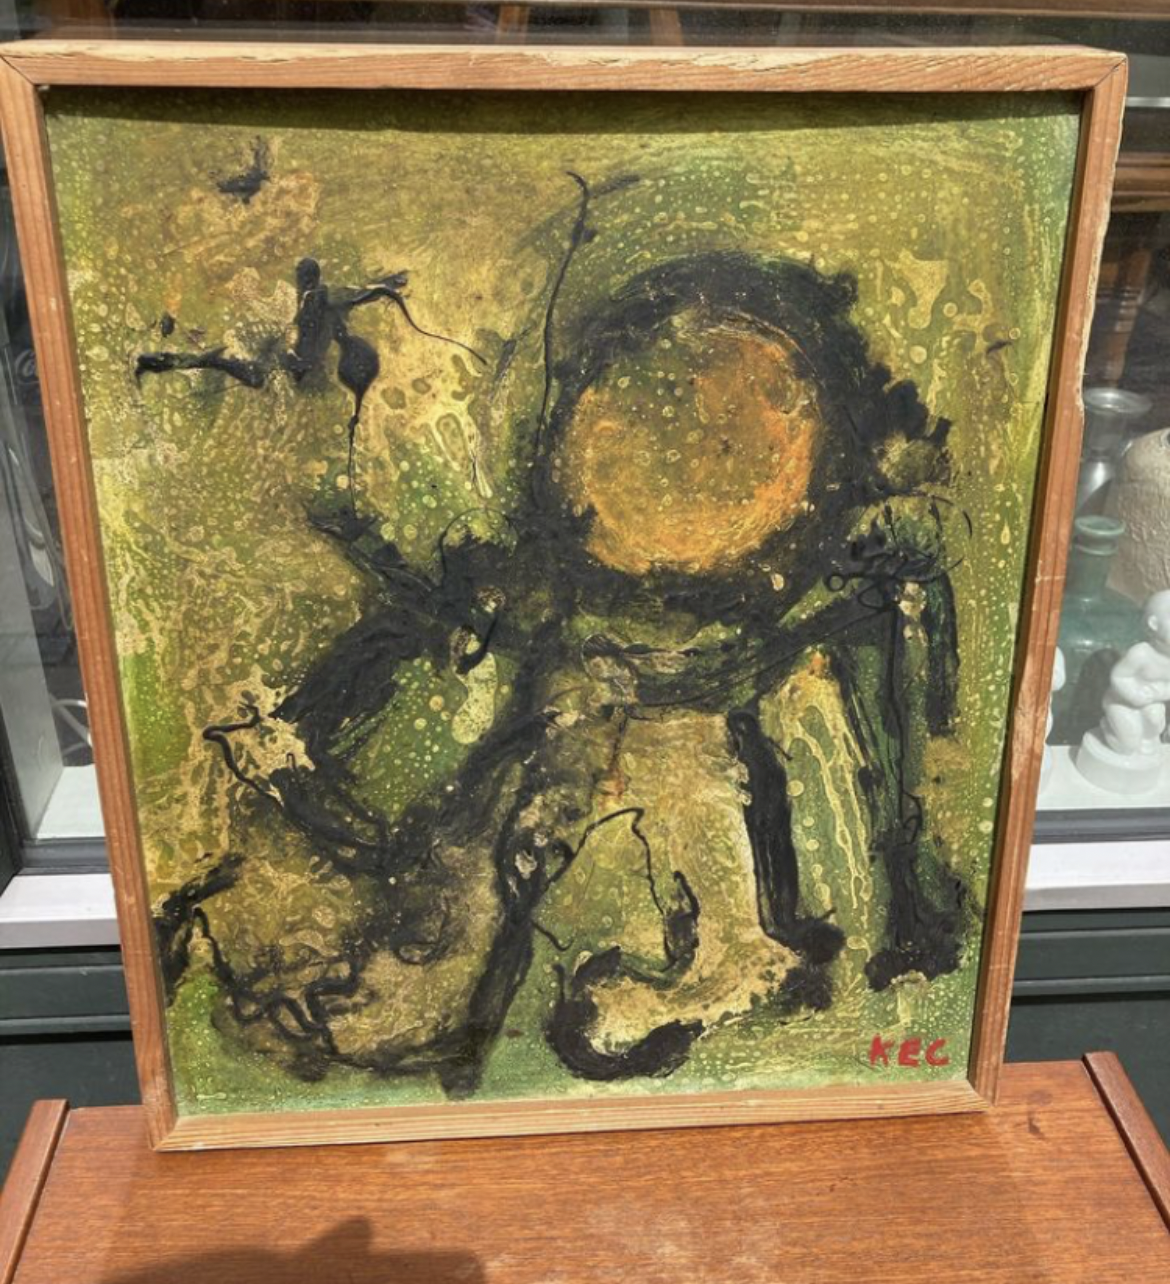 Abstract modern painting on plate by Kai E. Christensen - no. 01960